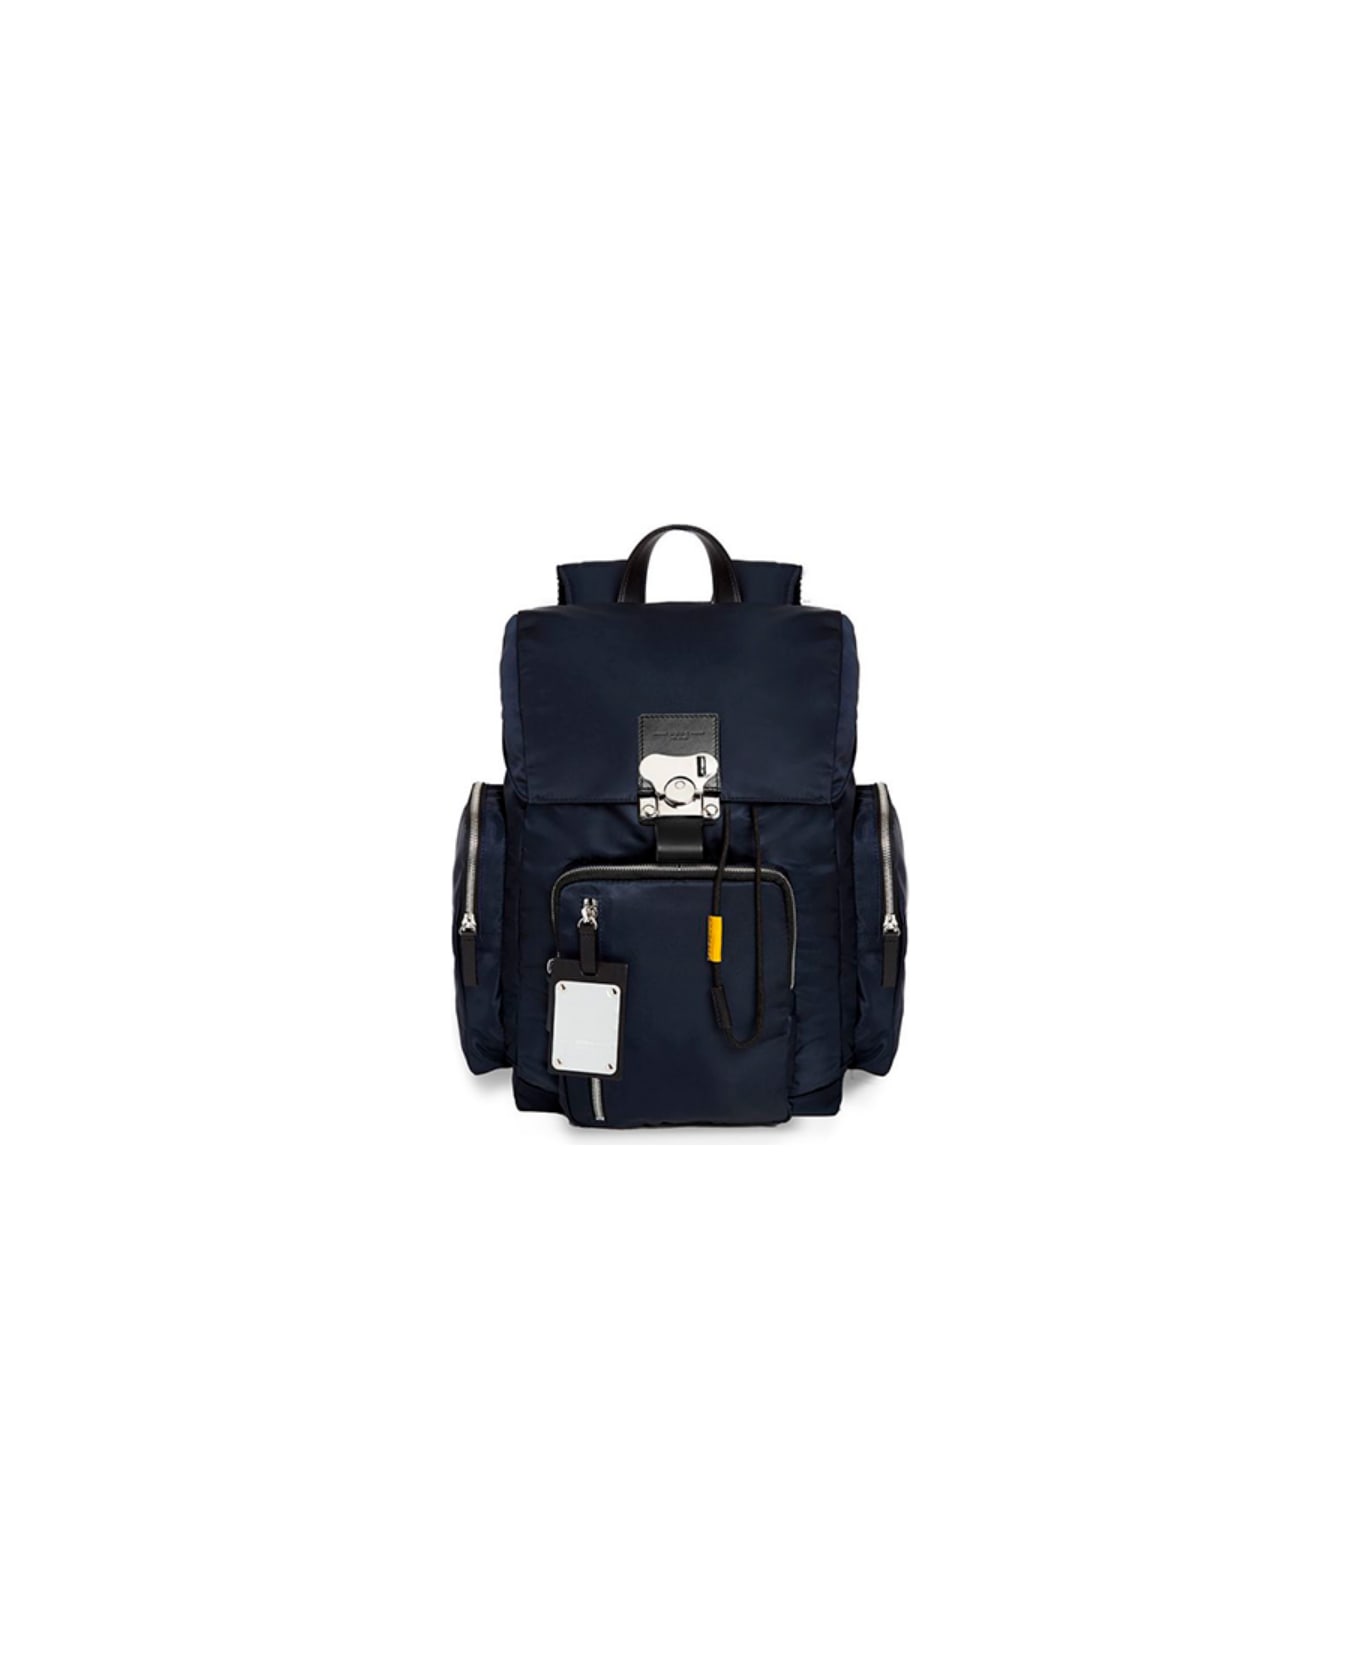 FPM Butterfly Pc Backpack M - Indigo Blue